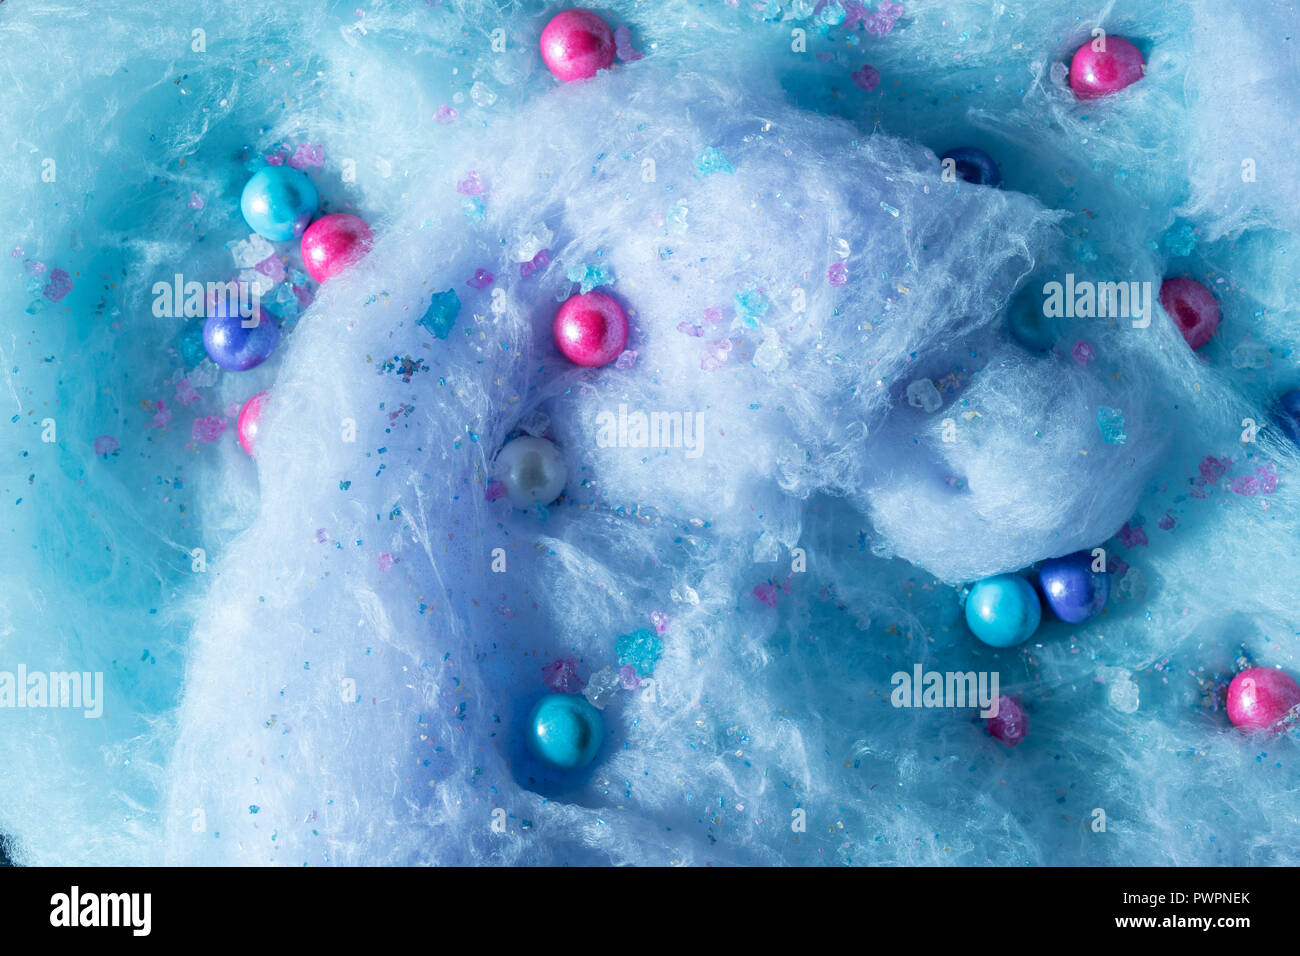 Giant swirl of blue and purple cotton candy with large gumballs and rock candies scattered throughout. Stock Photo